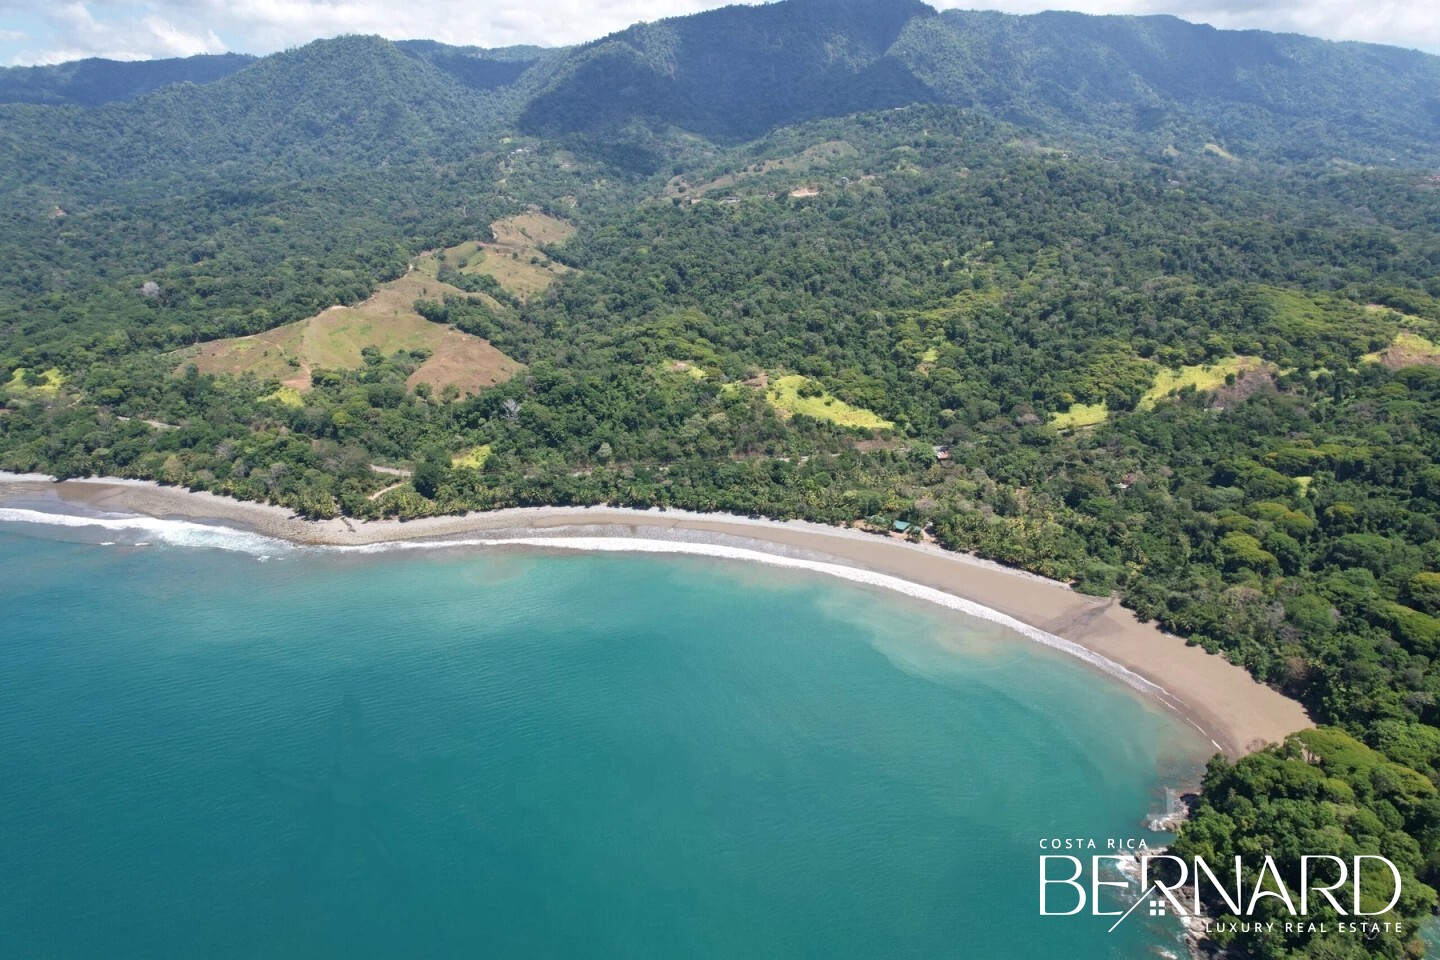 Scenic view of a lush Costa Rican landscape ideal for real estate investment